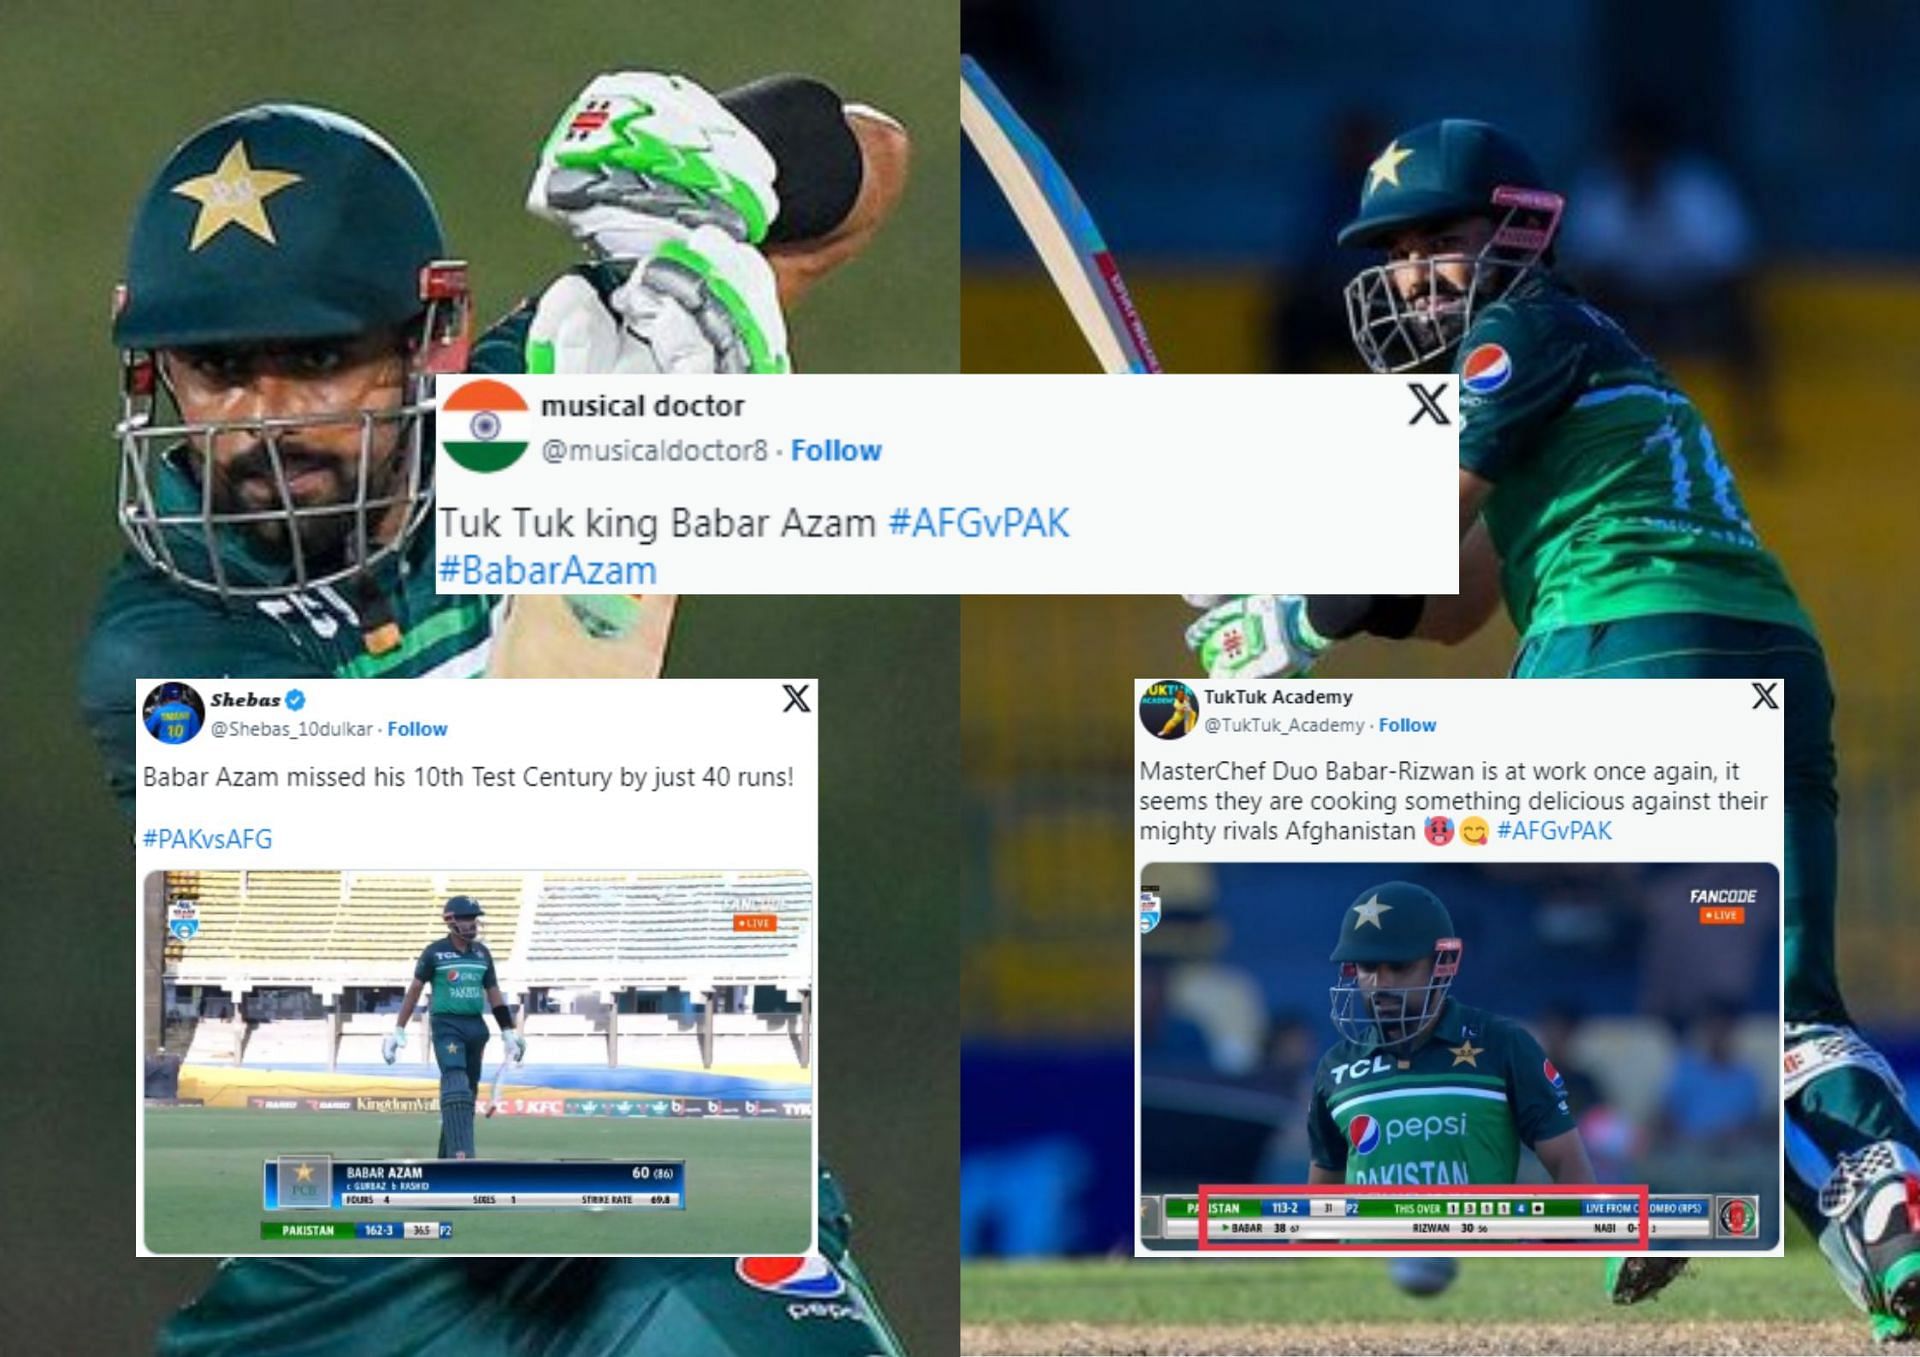 Babar Azam and Mohammad Rizwan came for some flak for their slow going in the 3rd ODI against Afghanistan (Picture Credits: Twitter/Pakistan Cricket Board).